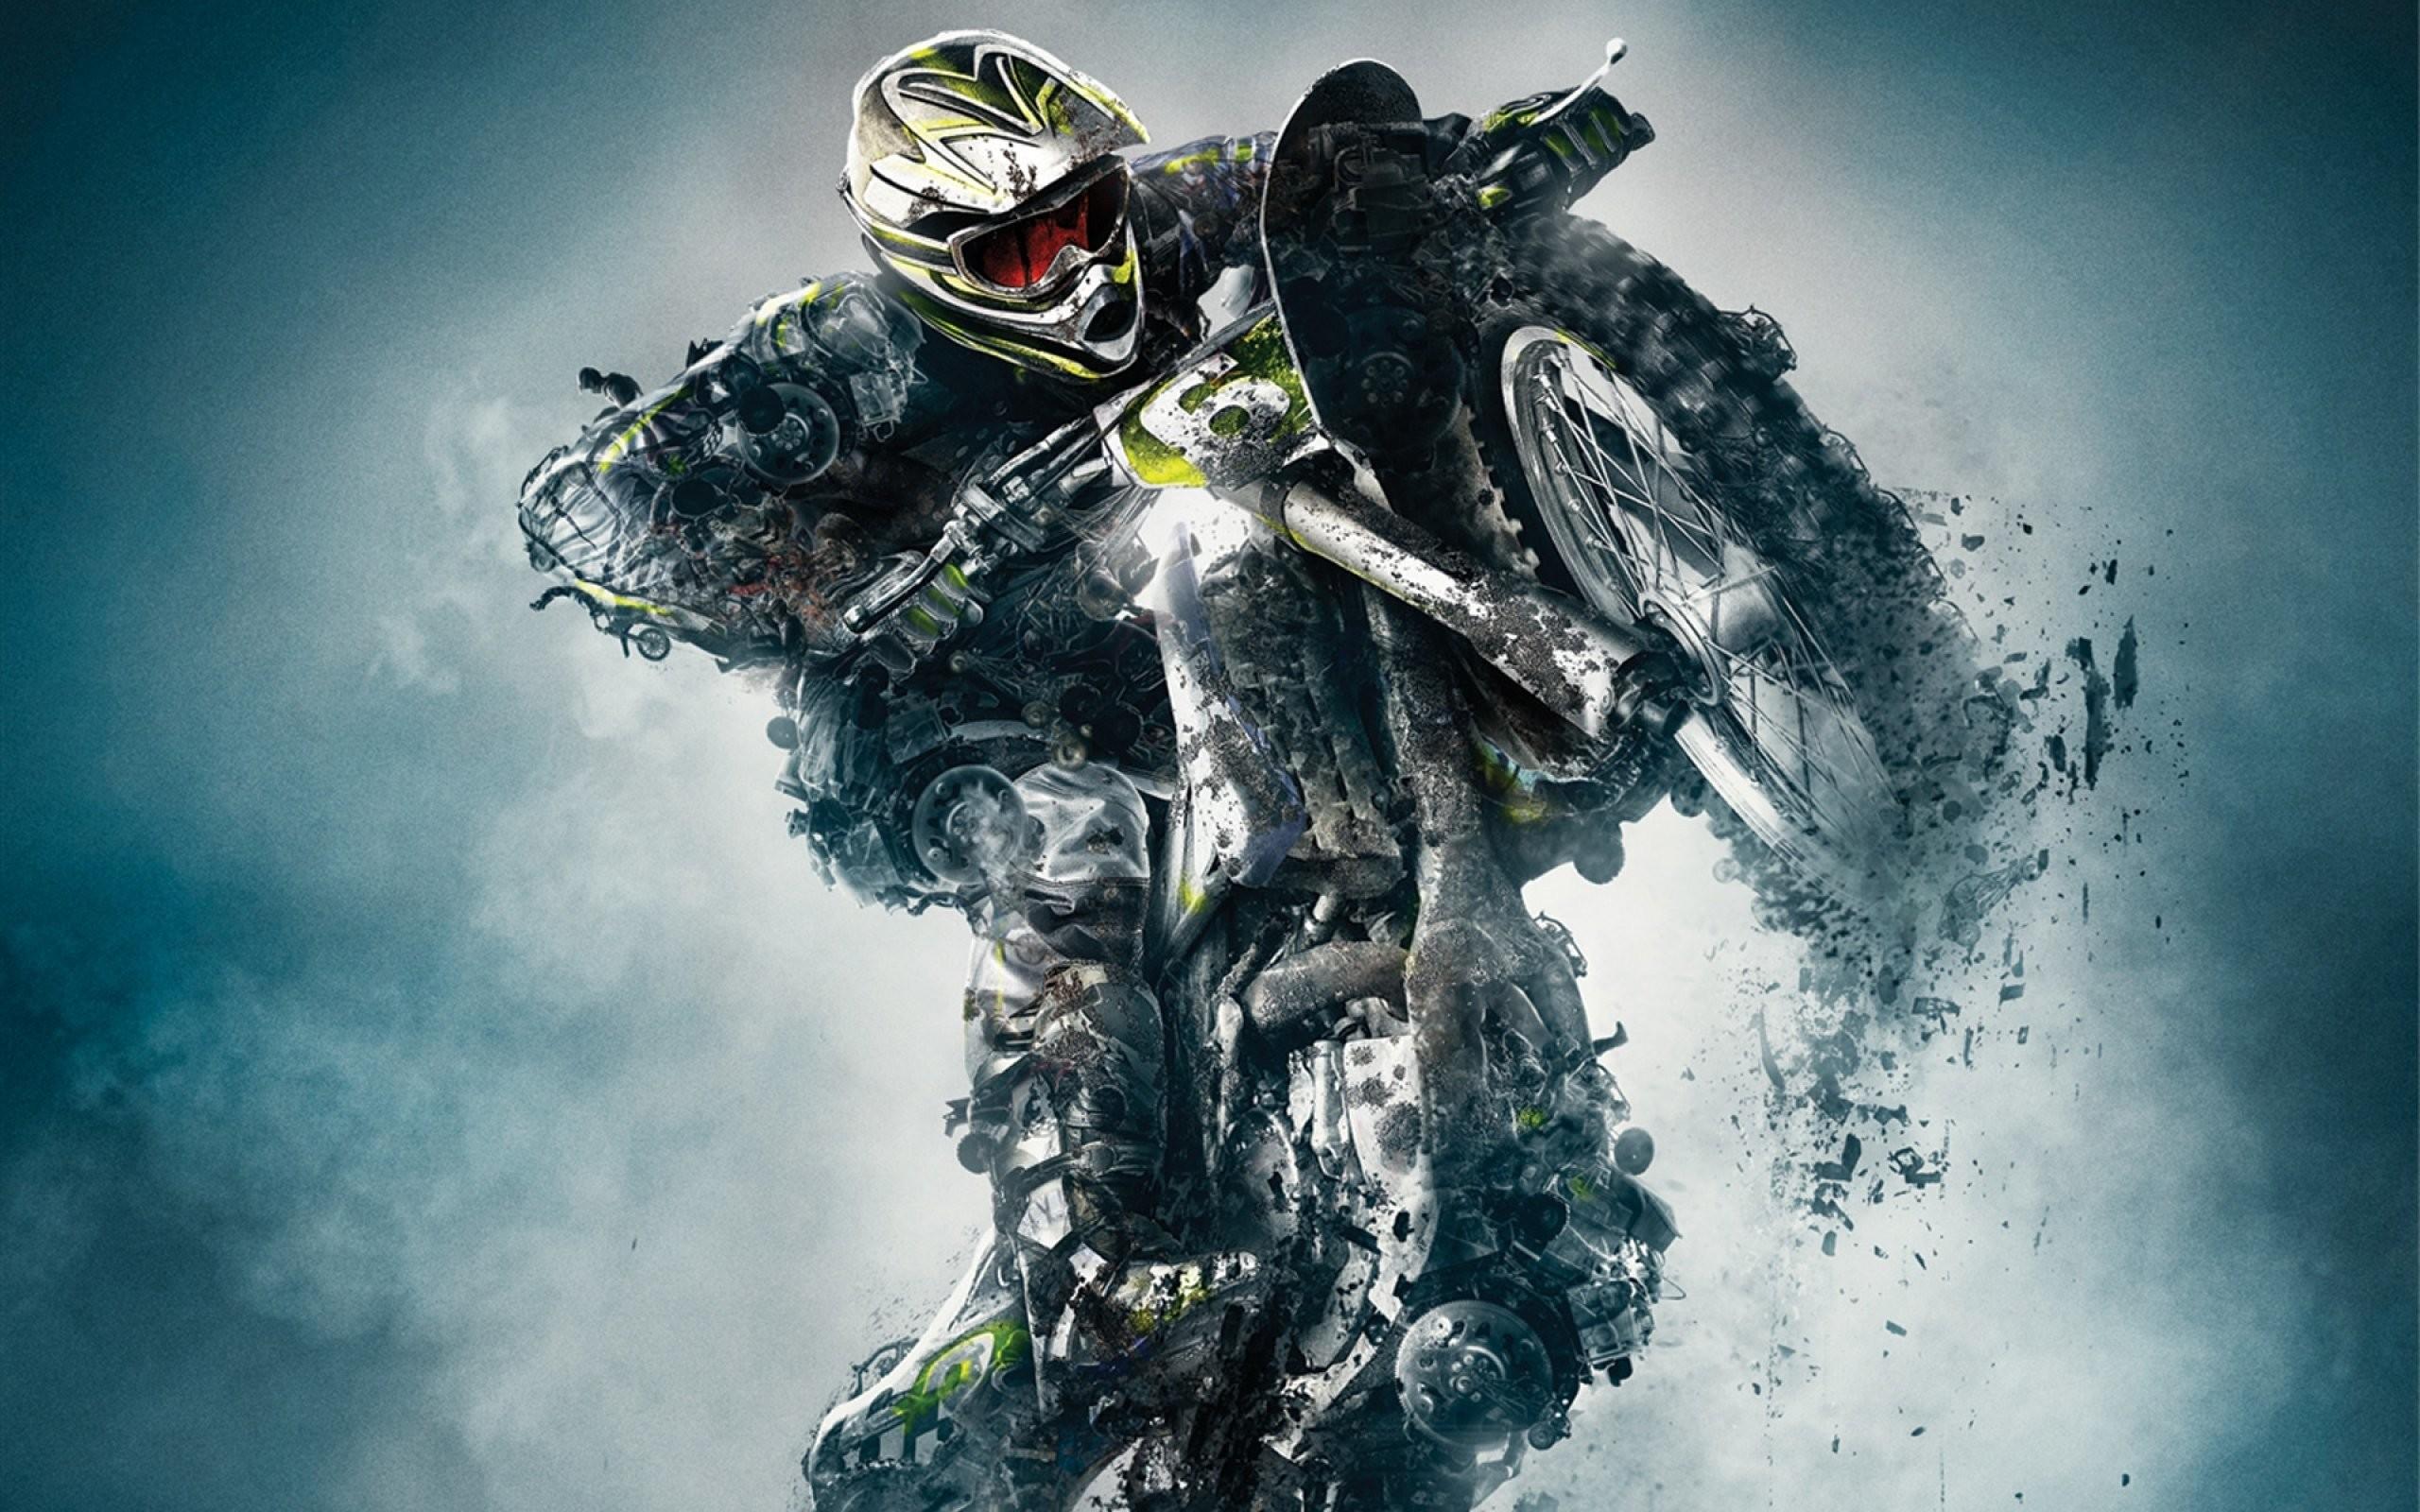 Collection of Motocross Wallpaper HD (image in Collection) MXGP 2019 Wallpaper